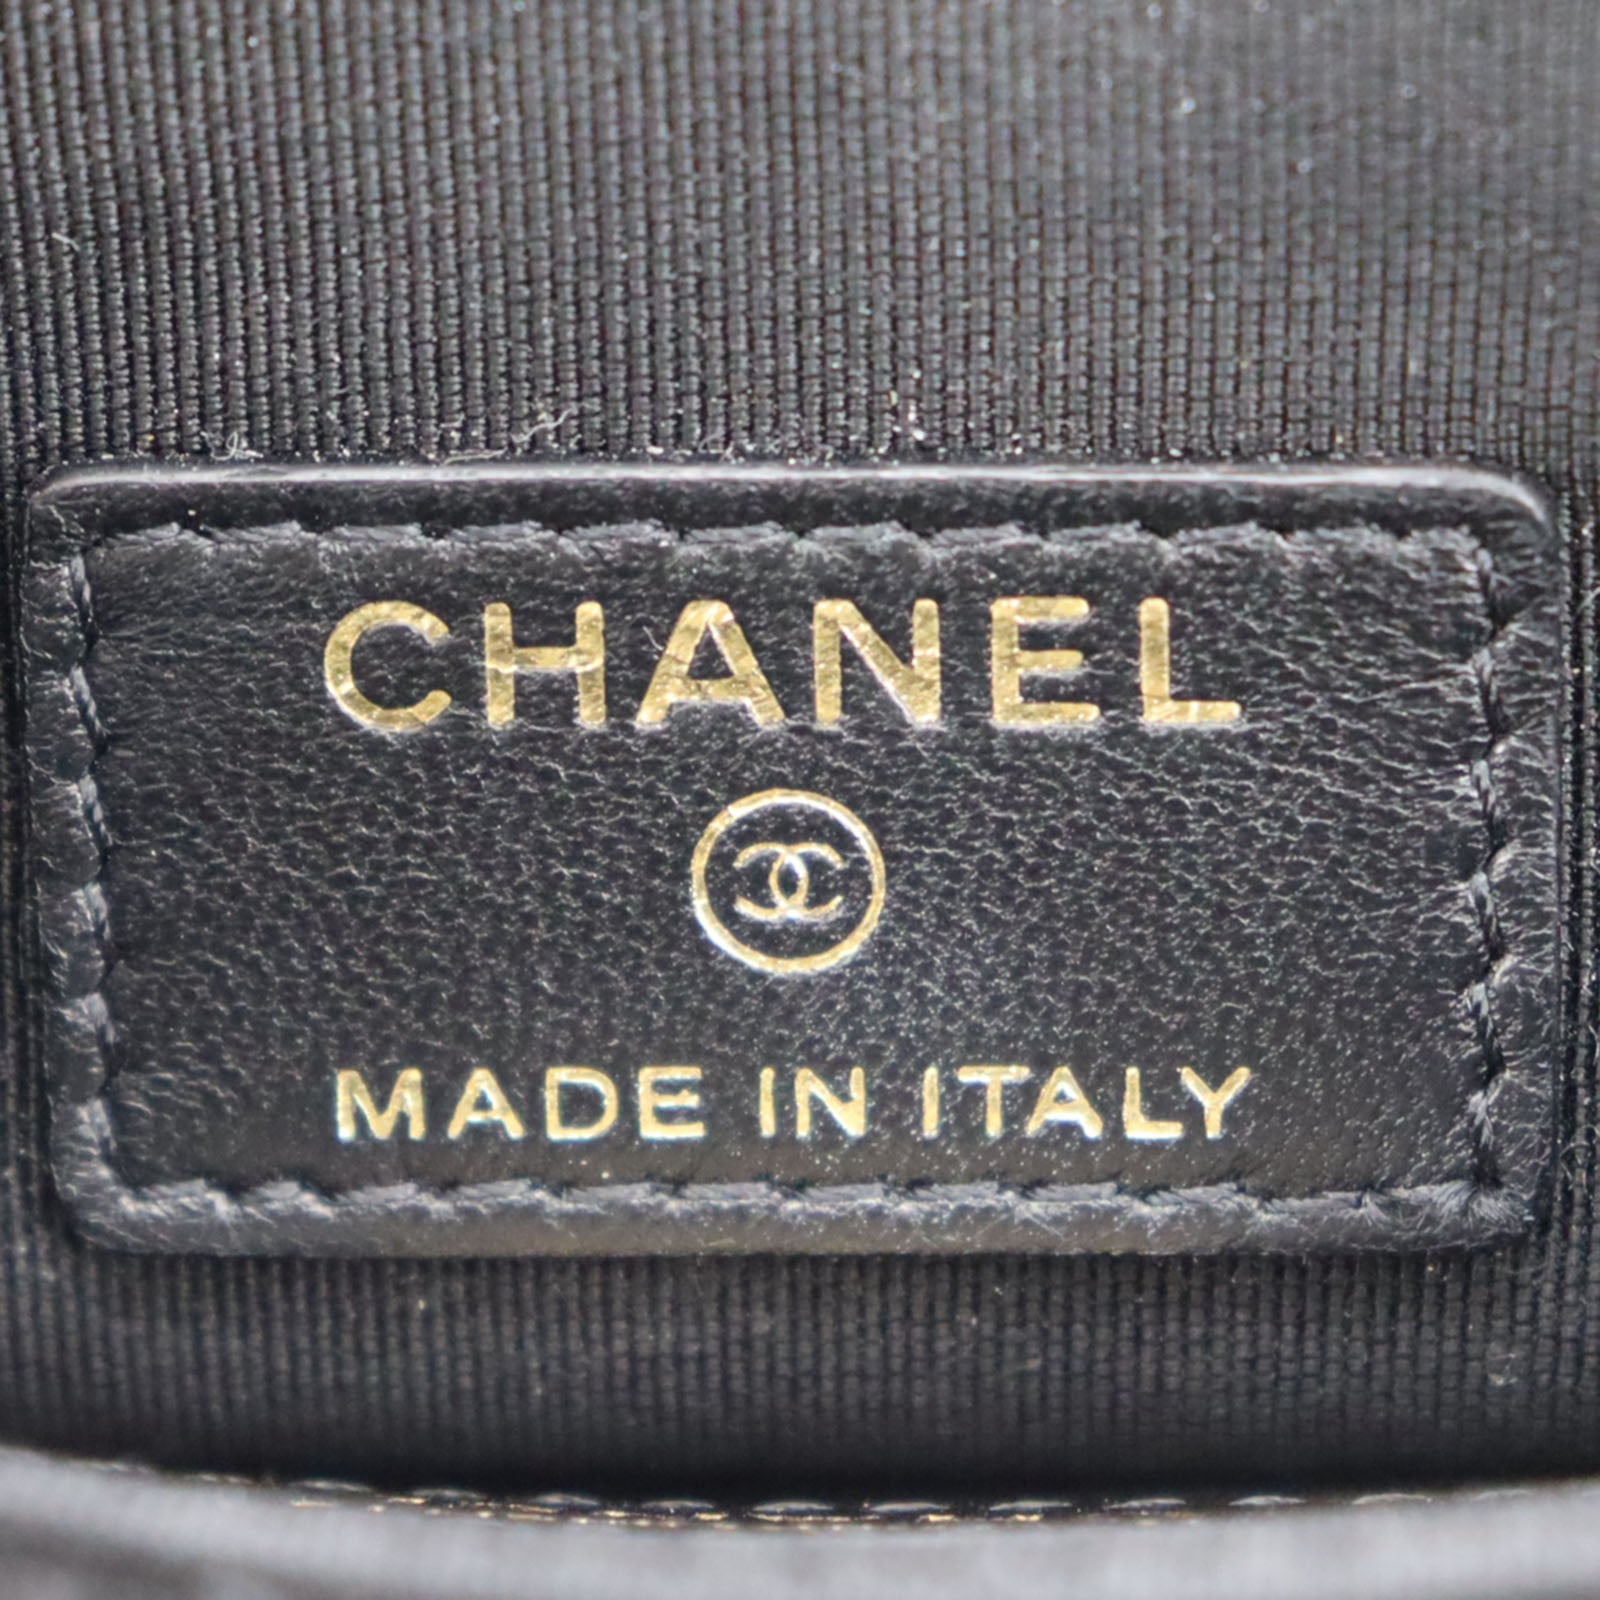 Chi tiết hơn 63 về chanel made in italy label  Du học Akina